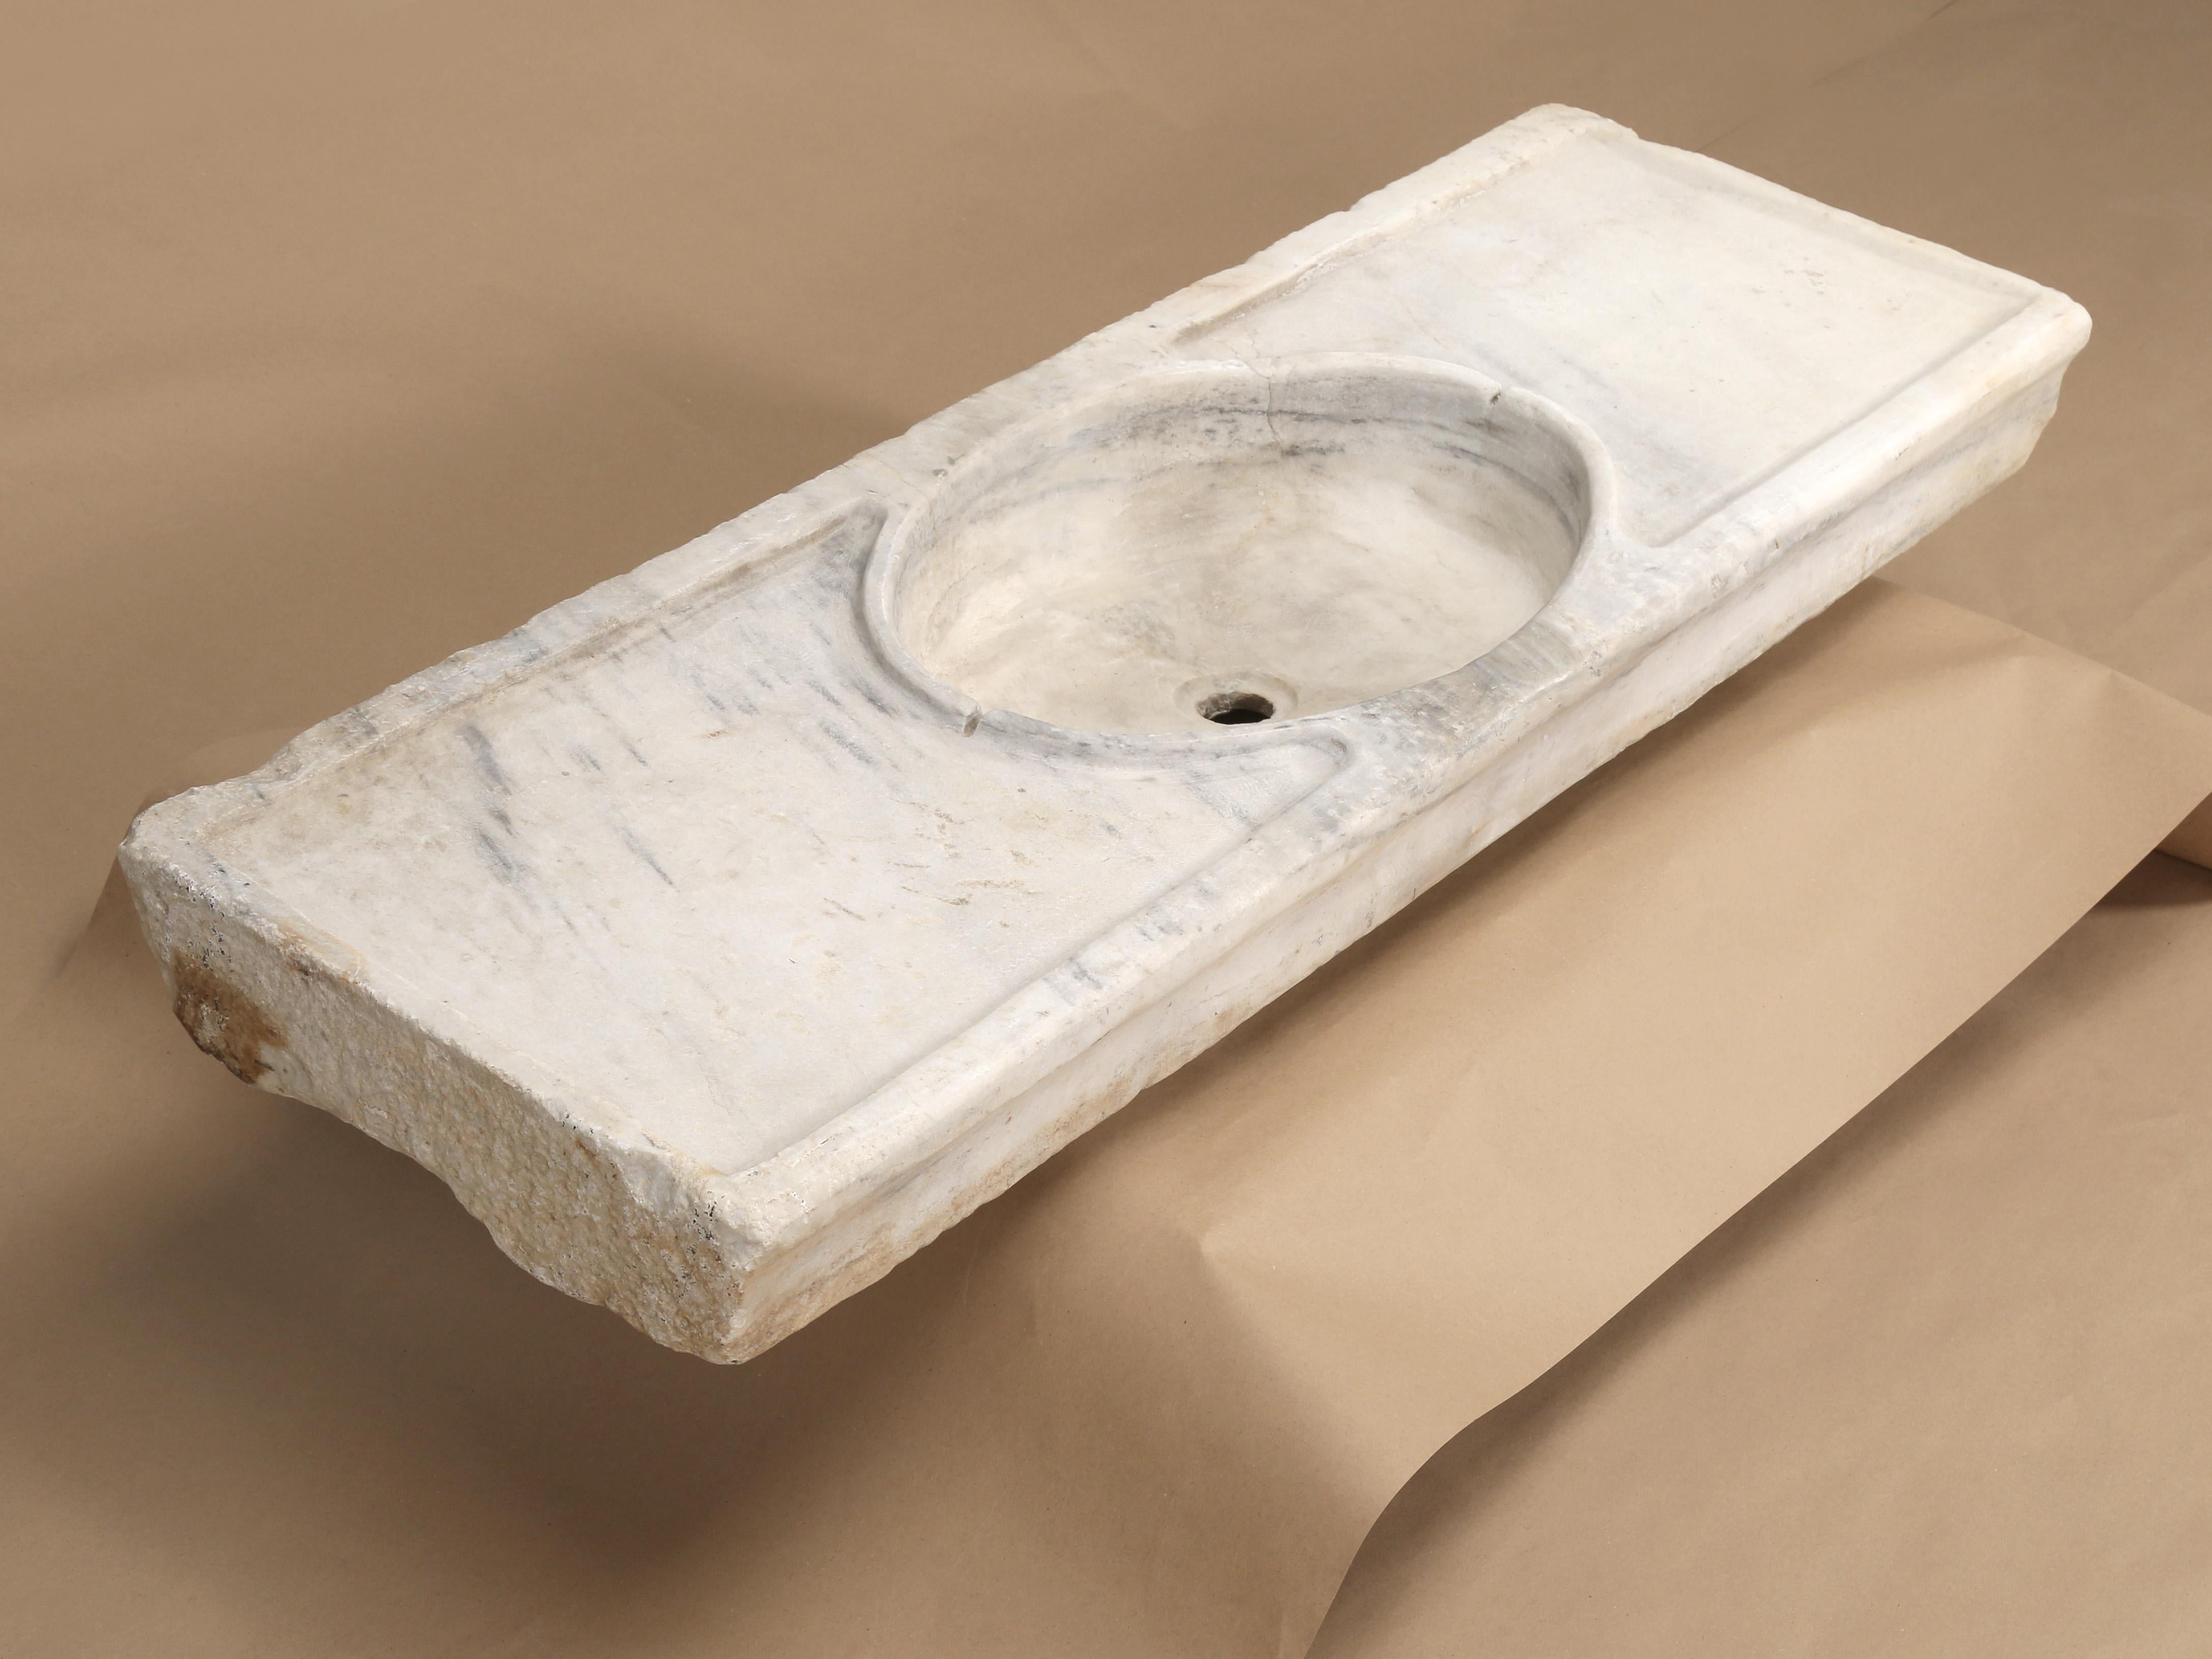 We believe that this sink was carved from a large block of statuary (also Statuario) marble, which comes from the mountains above Carrara, a town in Northern Tuscany. Statuary marble has a white background, but not a lot of color variation. Judging